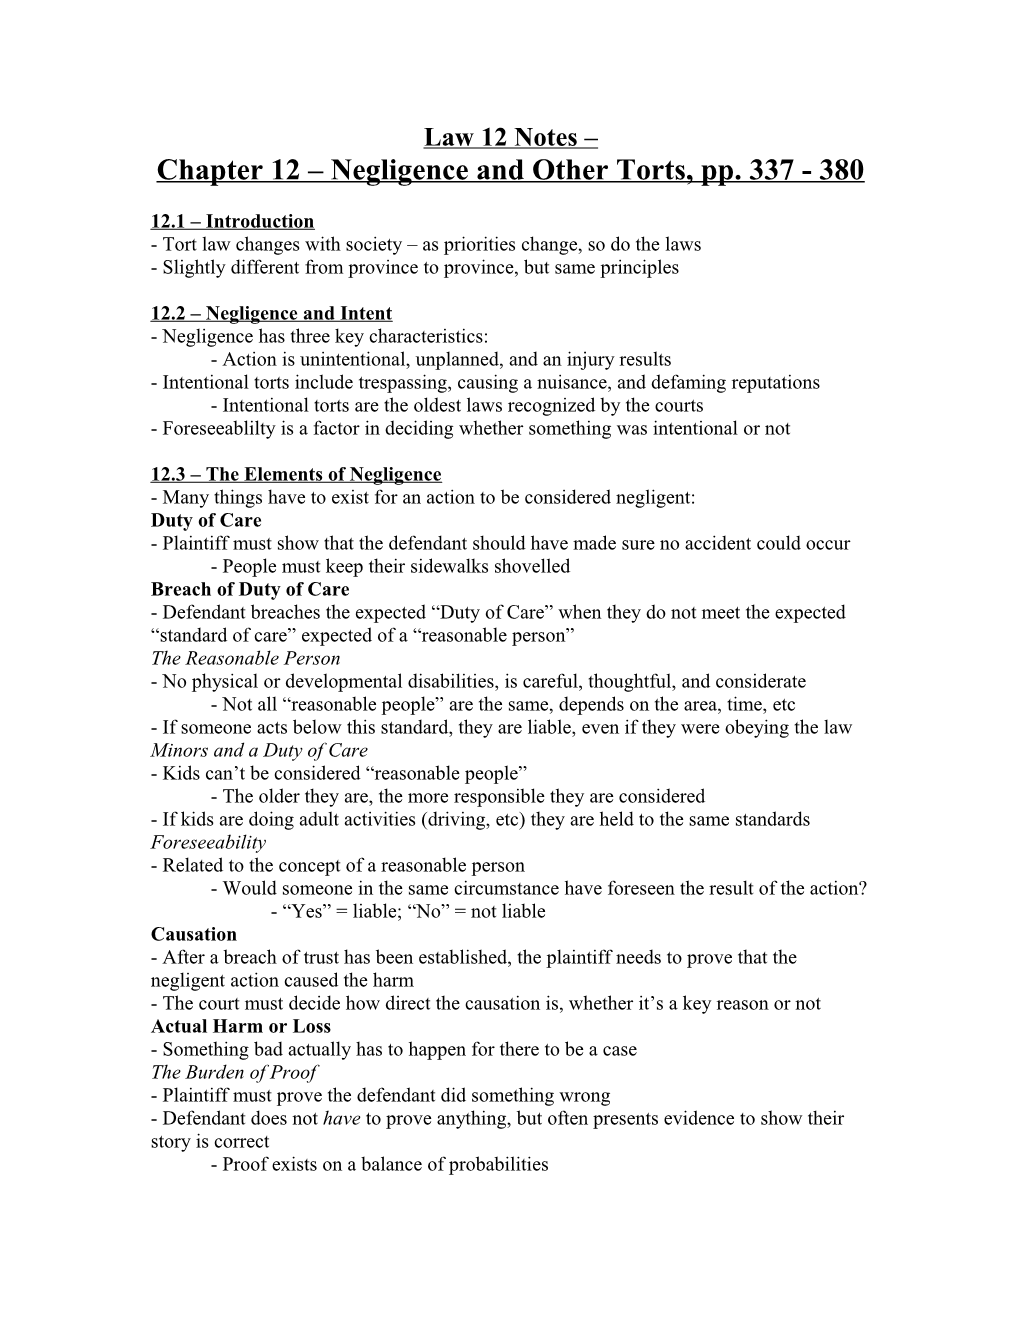 Chapter 12 Negligence and Other Torts, Pp. 337 - 380